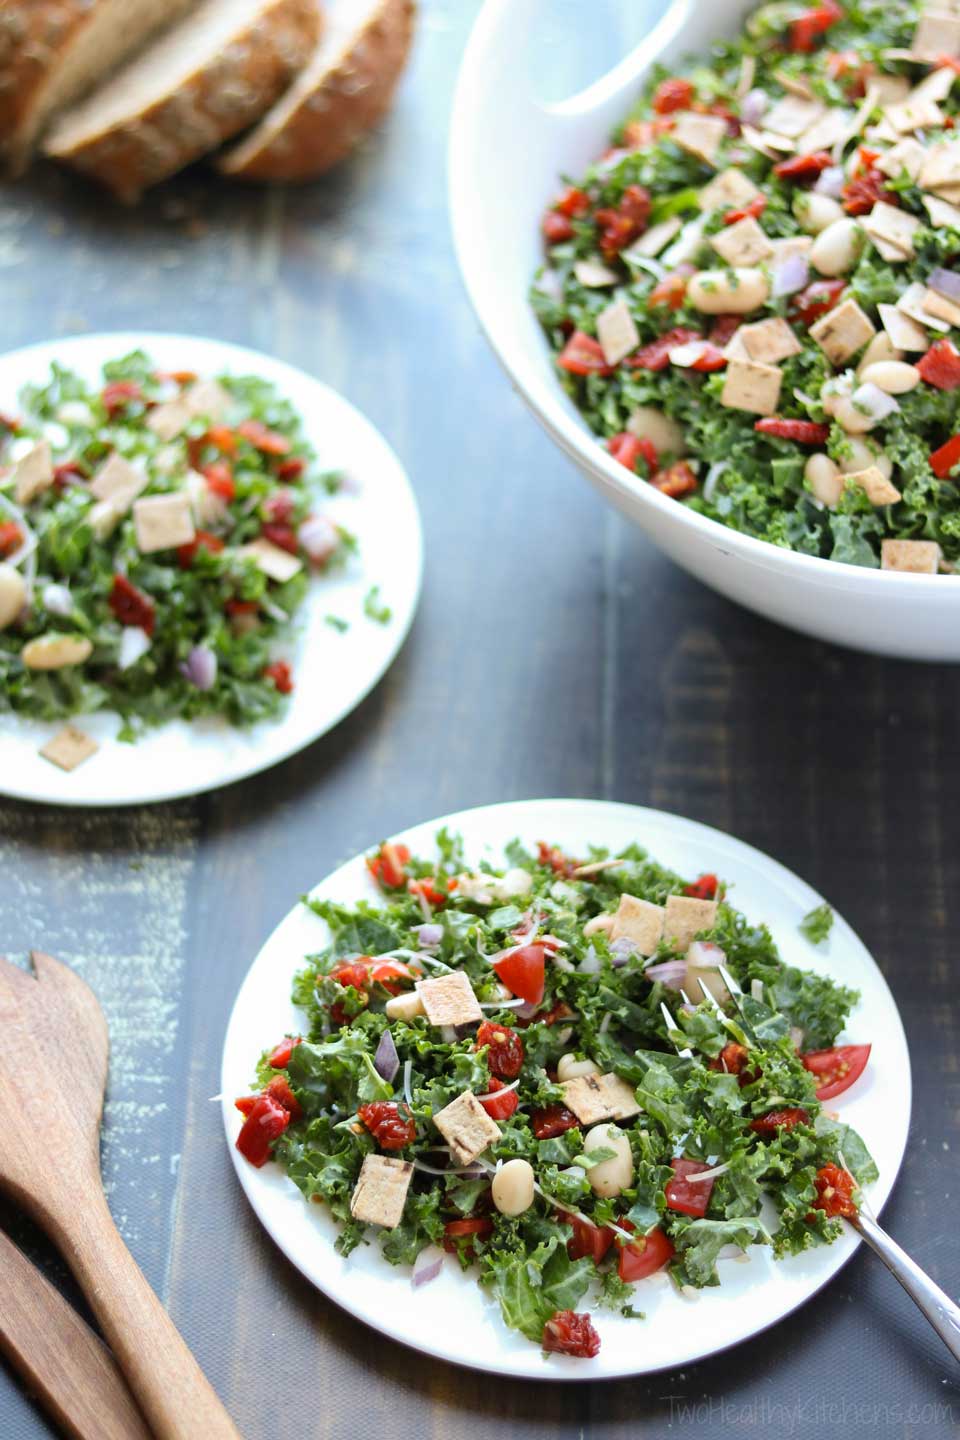 Our Tuscan Kale Salad with its easy Honey-Balsamic Dressing are quick and healthy enough for a light lunch, or they can be served as an impressive dinner side salad.